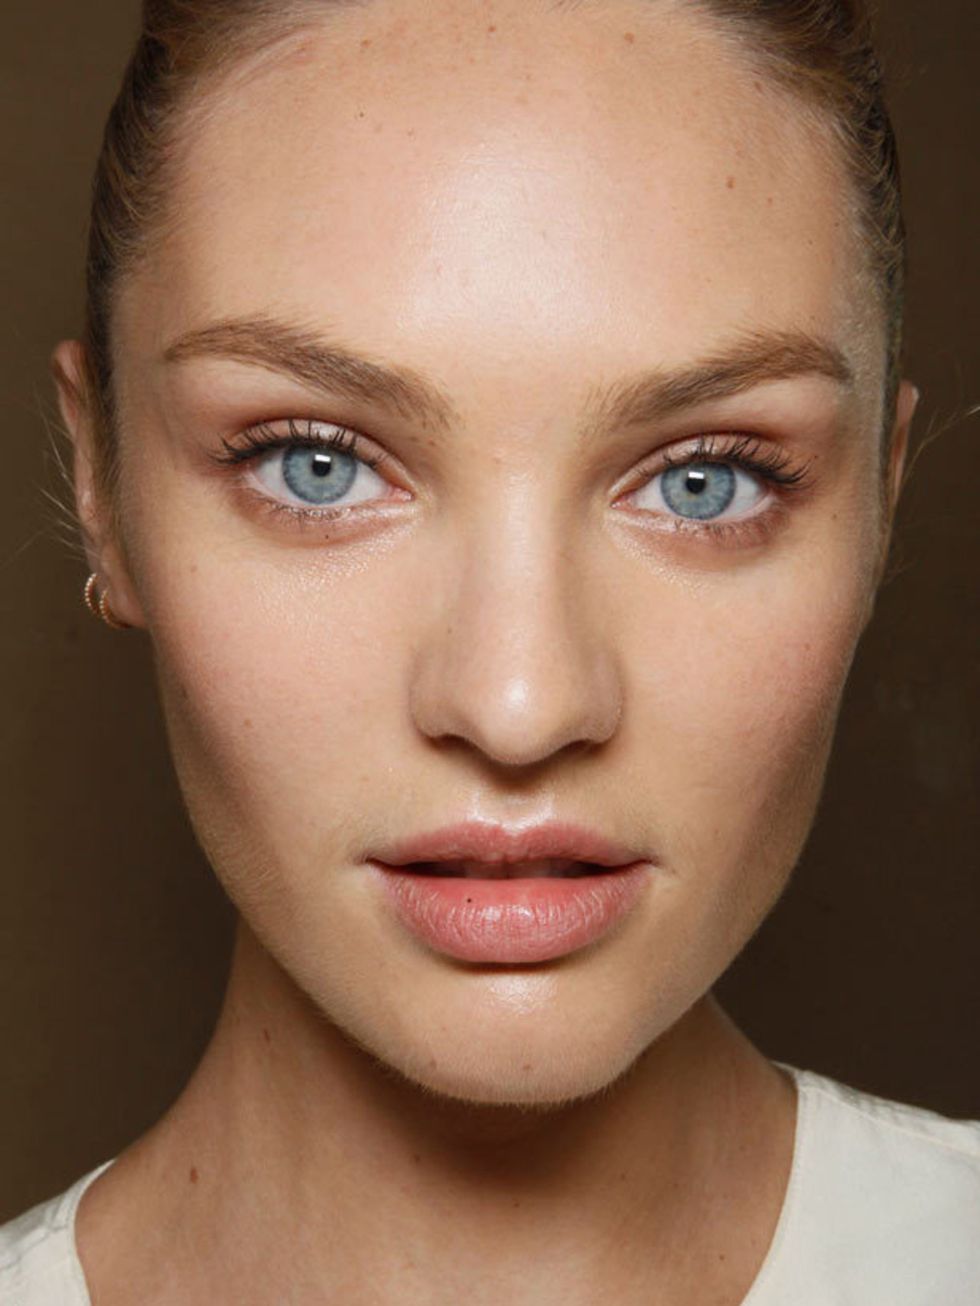 <p>Skin was resplendent in sheen this season. Make-up artists at <a href="http://www.elleuk.com/catwalk/collections/akris/">Akris</a>, <a href="http://www.elleuk.com/catwalk/collections/stella-mccartney/">Stella McCartney</a>, and <a href="http://www.elle